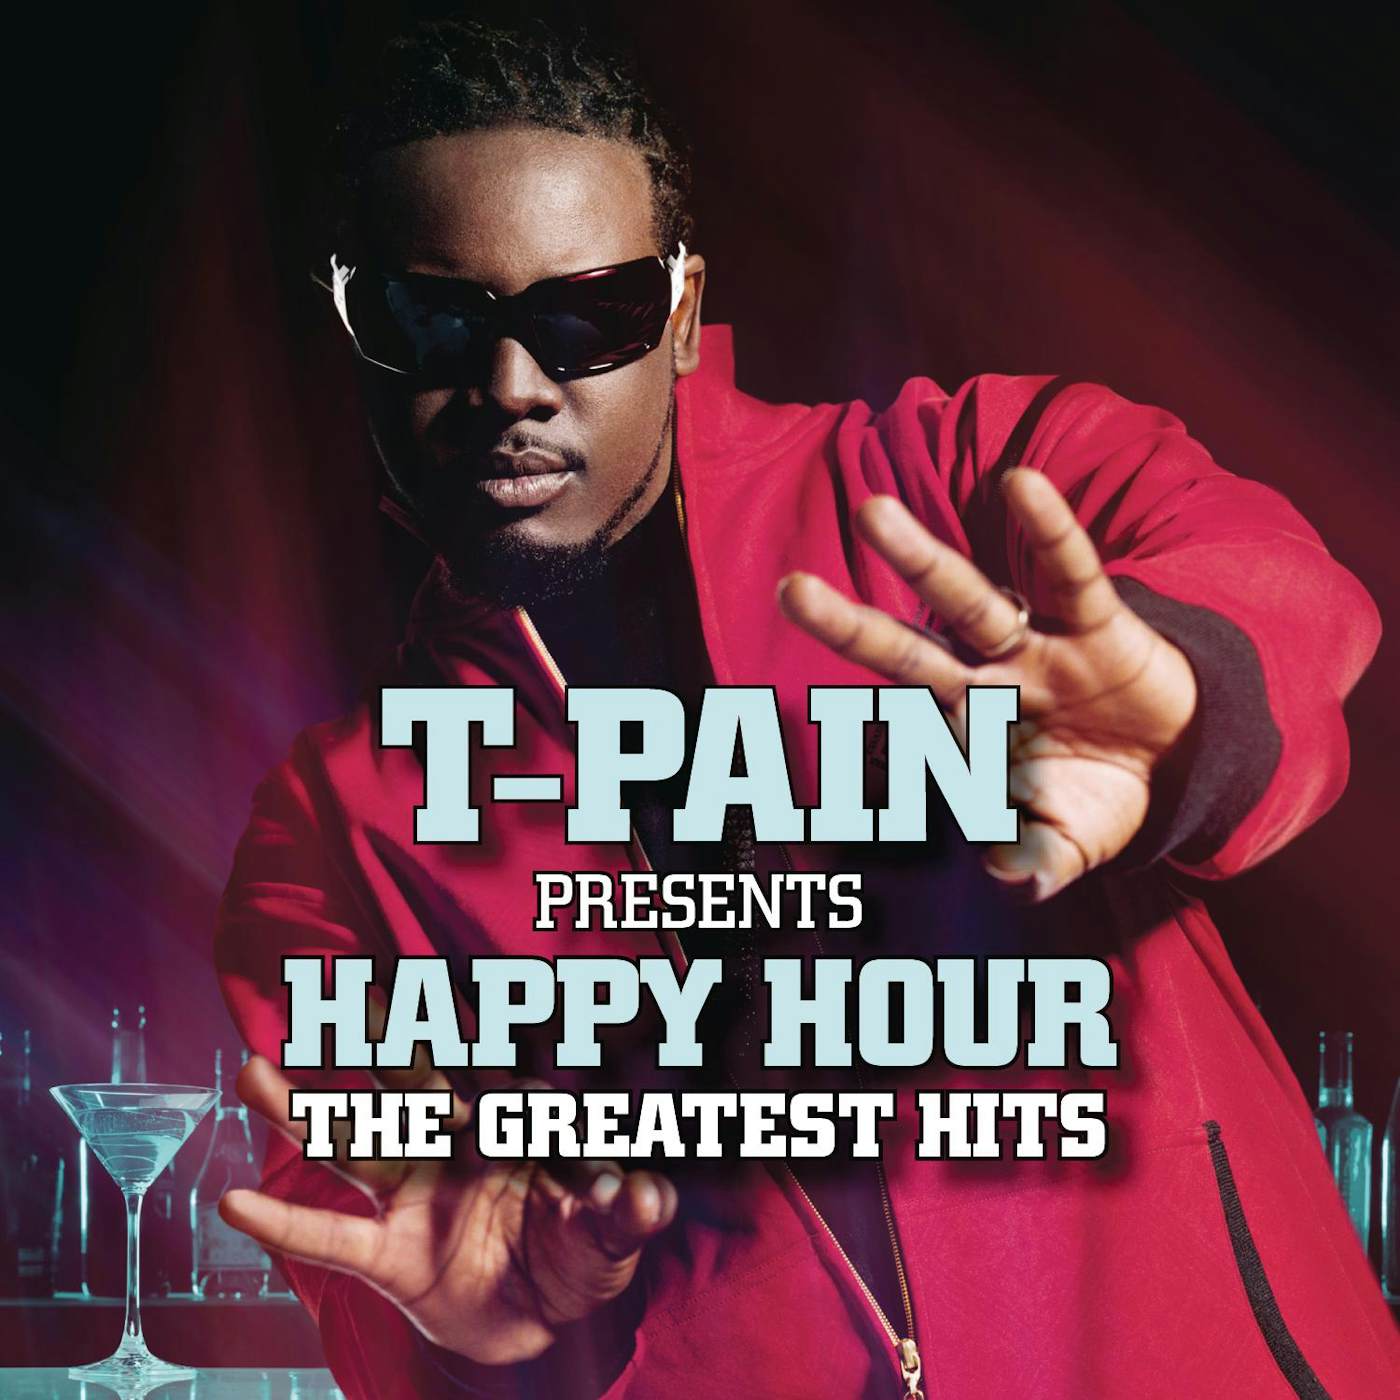 T-PAIN PRESENTS HAPPY HOUR: THE GREATEST HITS CD